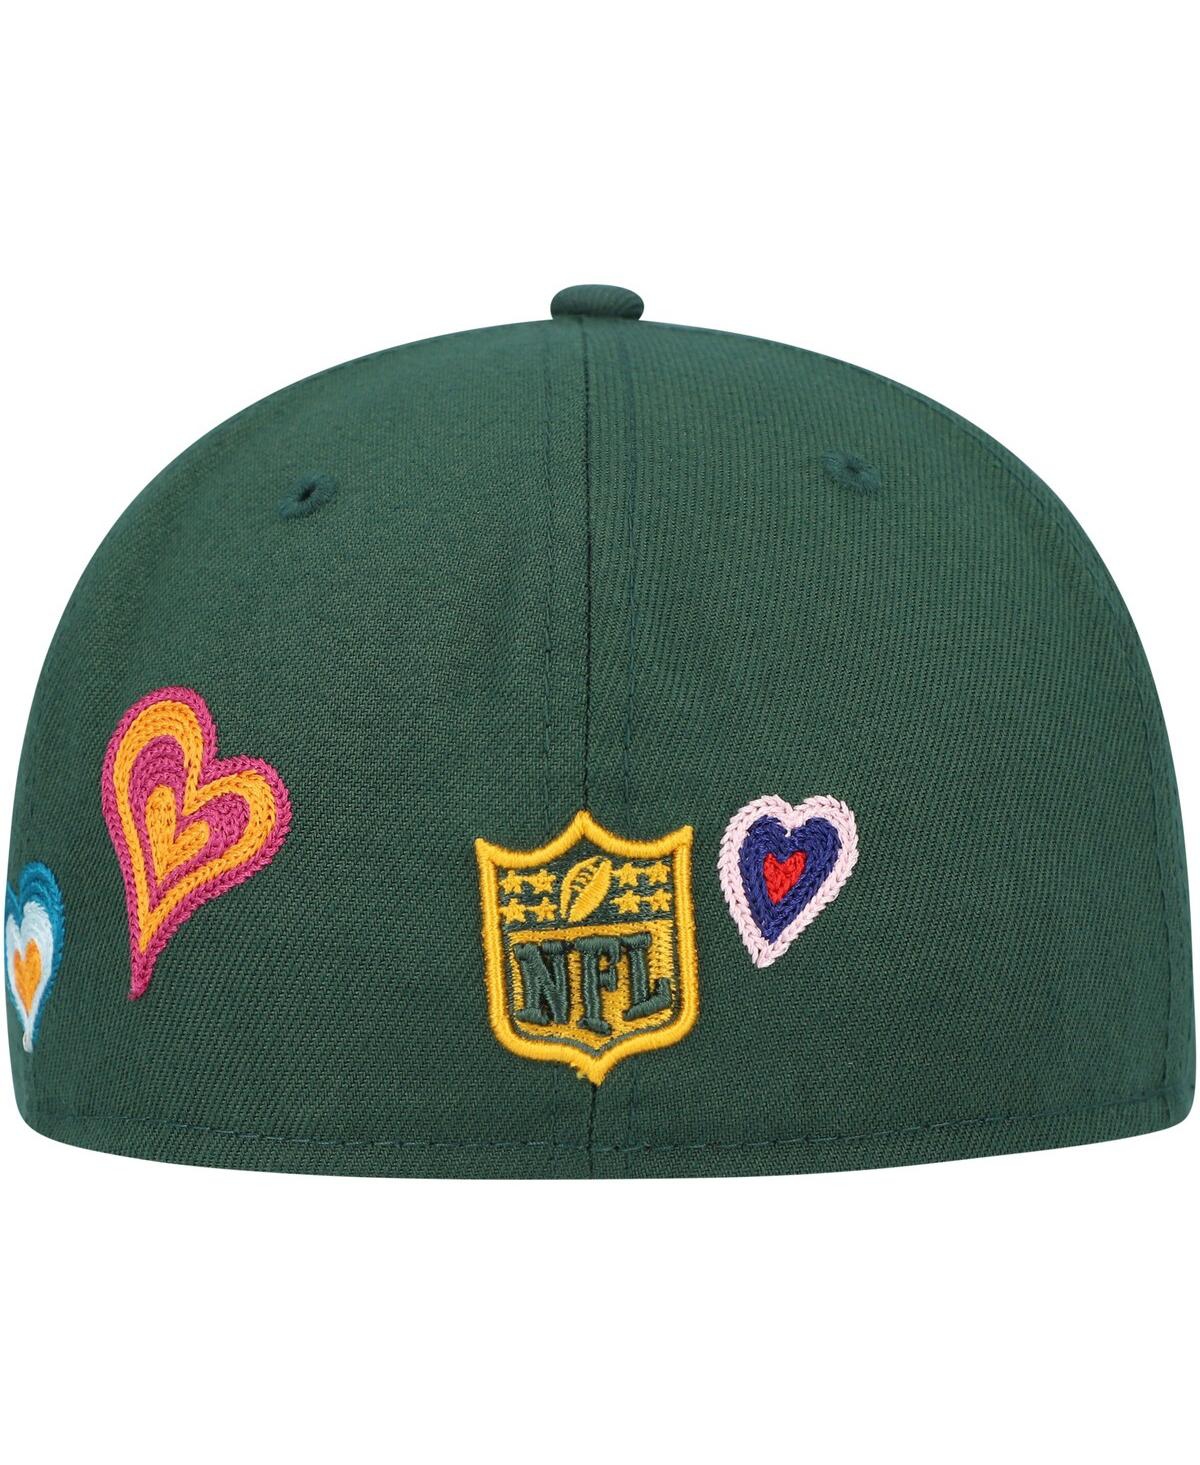 Shop New Era Men's  Green Green Bay Packers Chain Stitch Heart 59fifty Fitted Hat